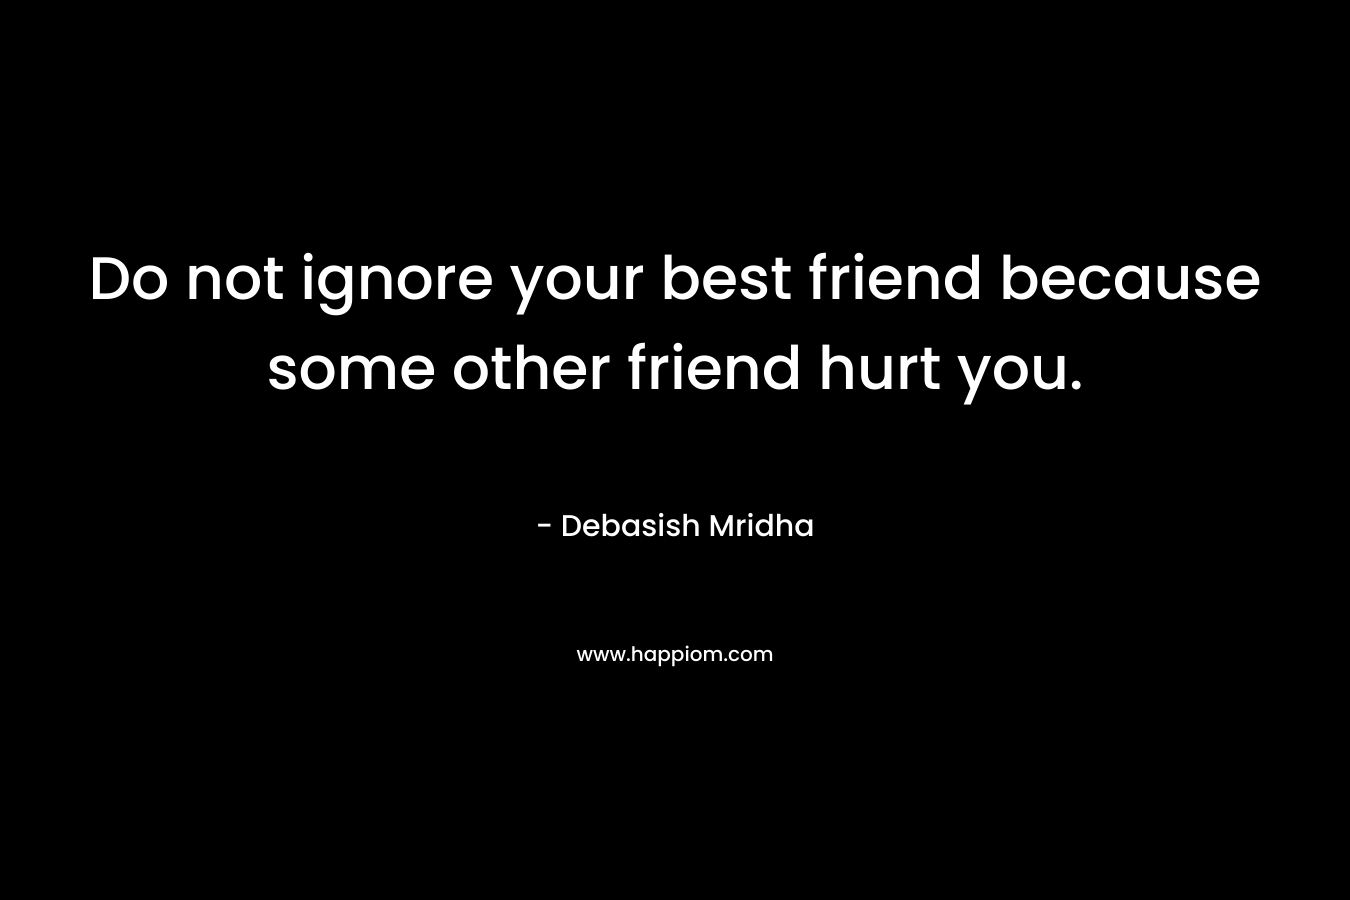 Do not ignore your best friend because some other friend hurt you.